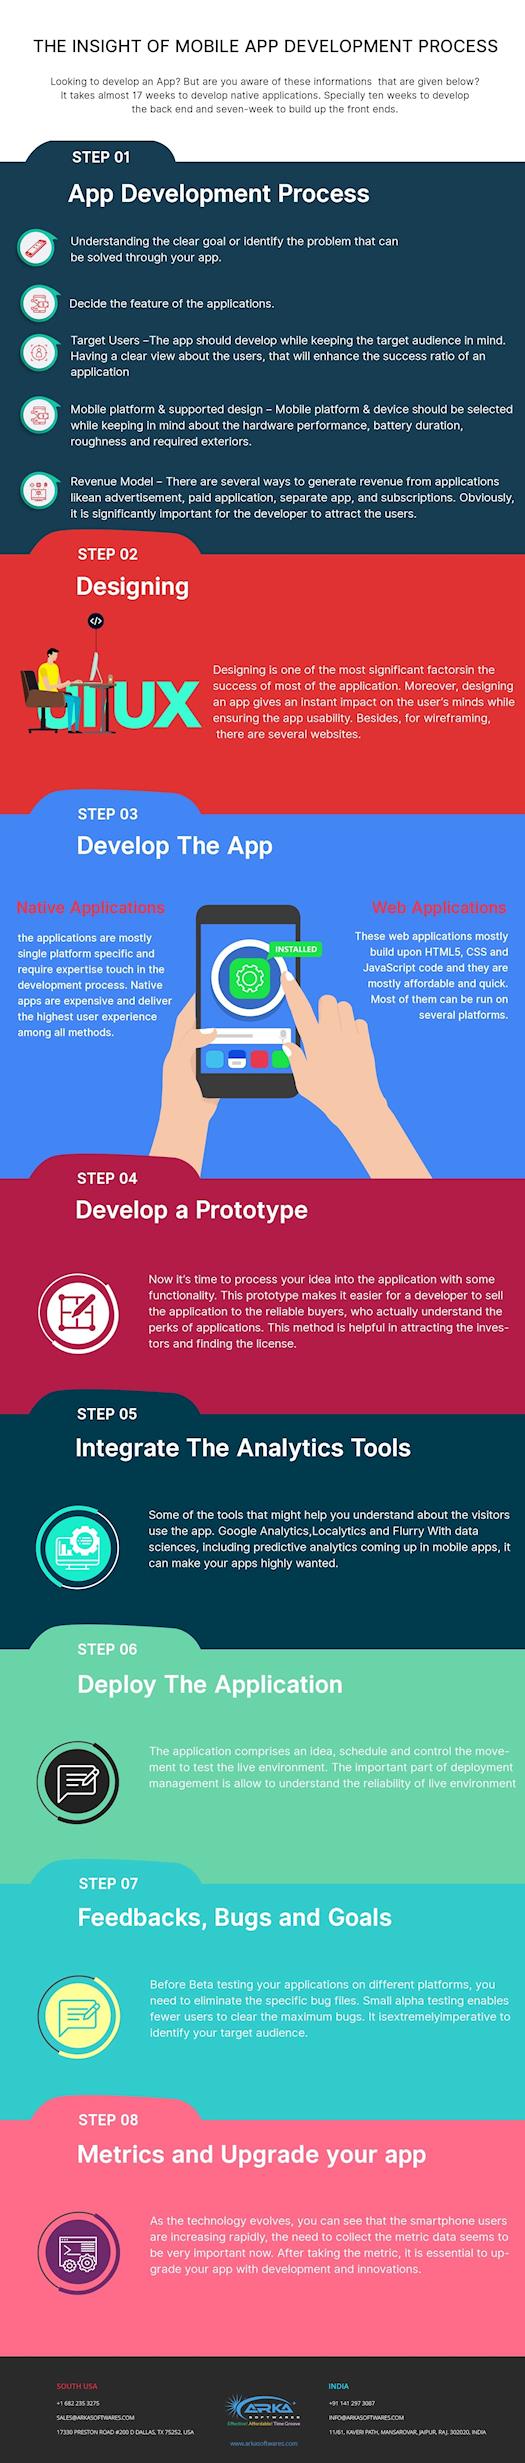 Infographic - Insight of Mobile App Development Process